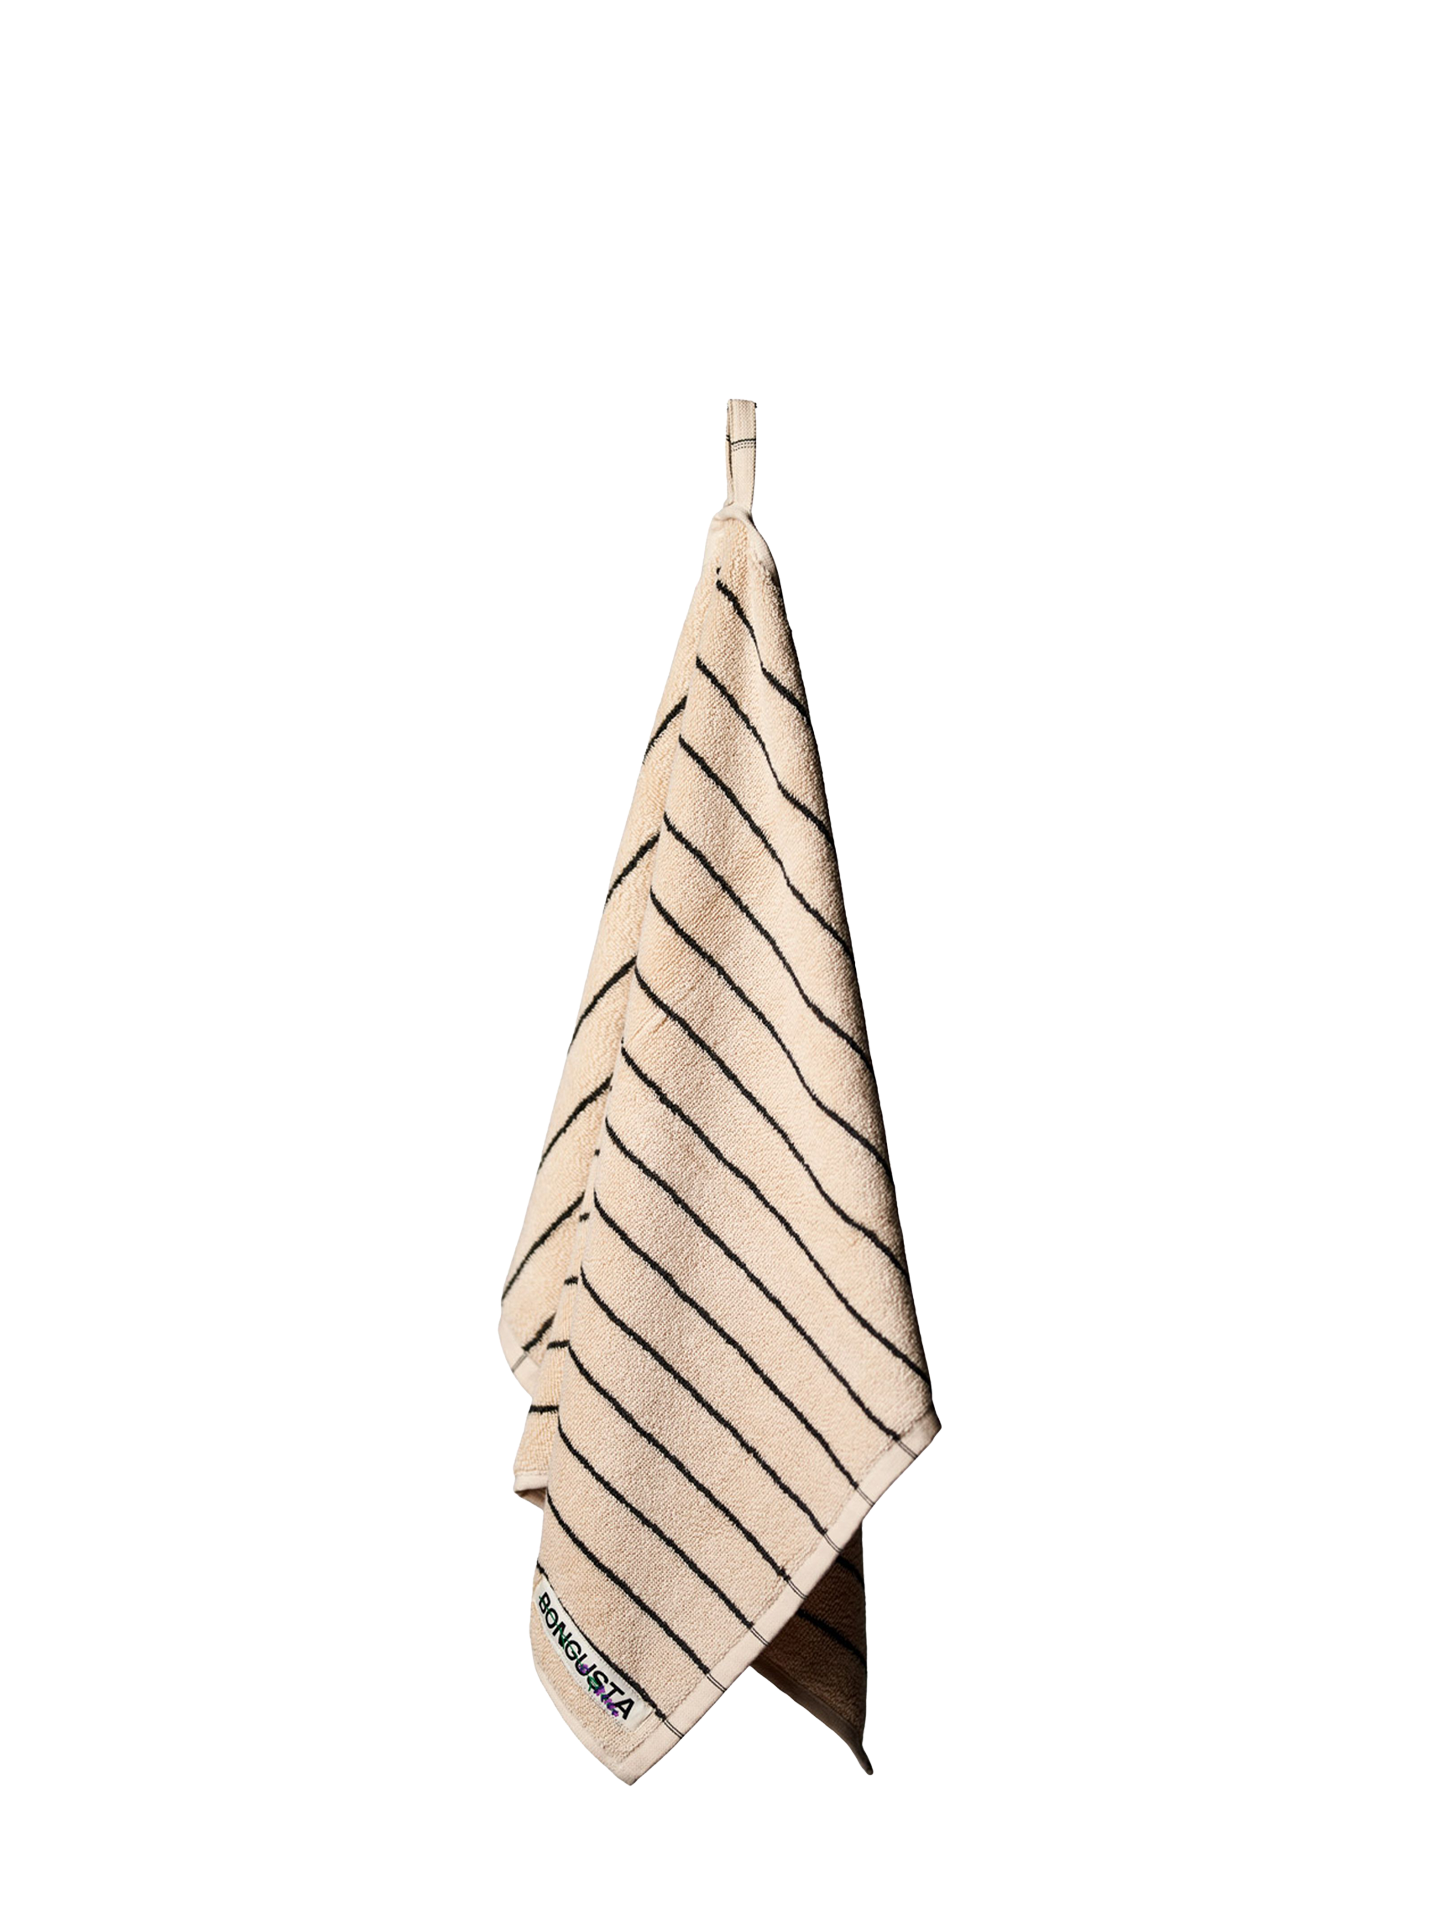 Naram guest towel, creme with thin stripe